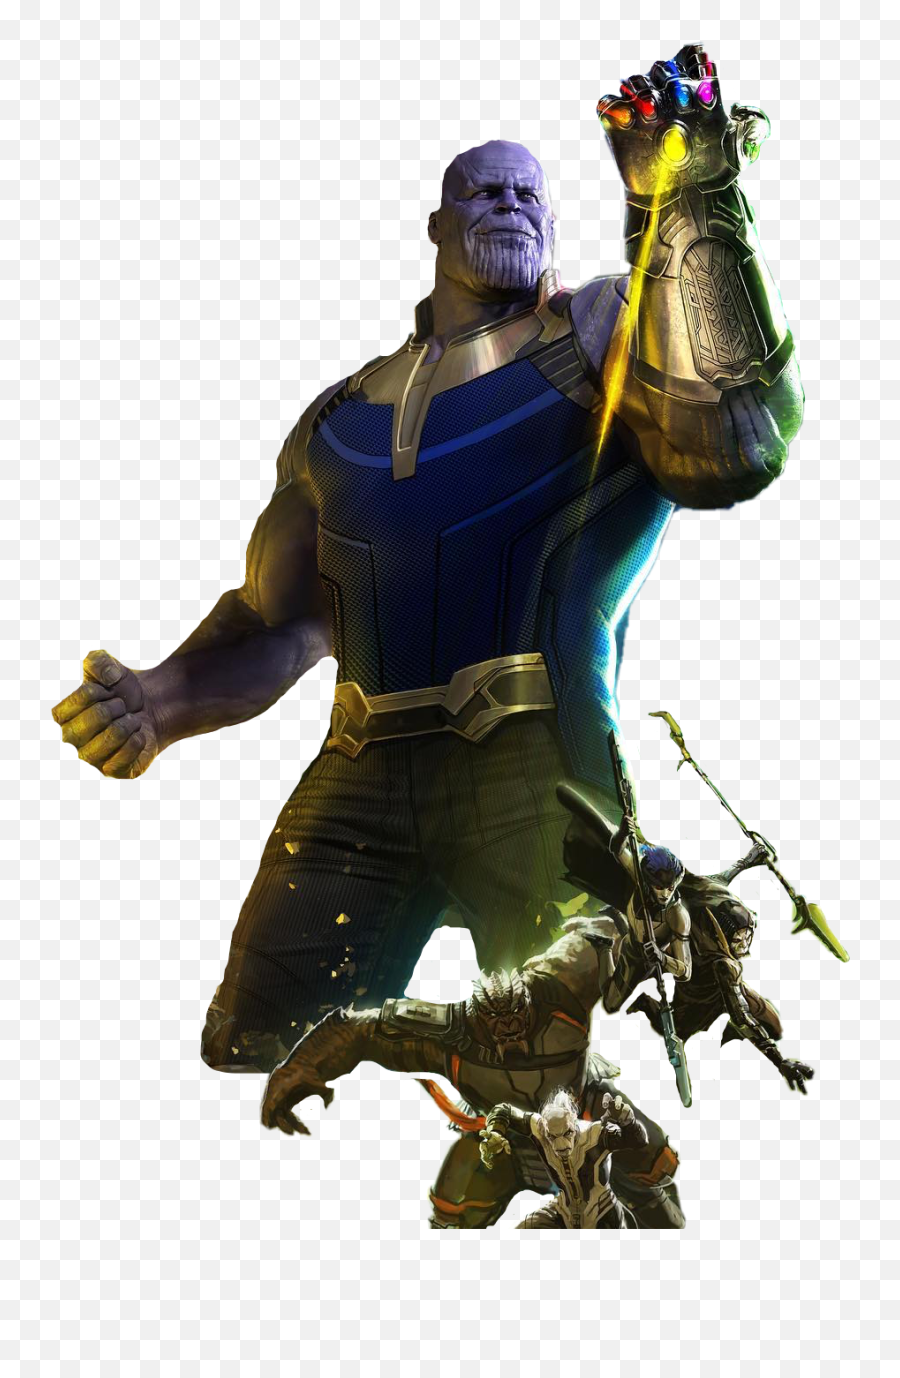 Avengers Infinity War Thanos Png - Thanos Infinity War Avengers Inifity War Thanos,War Png